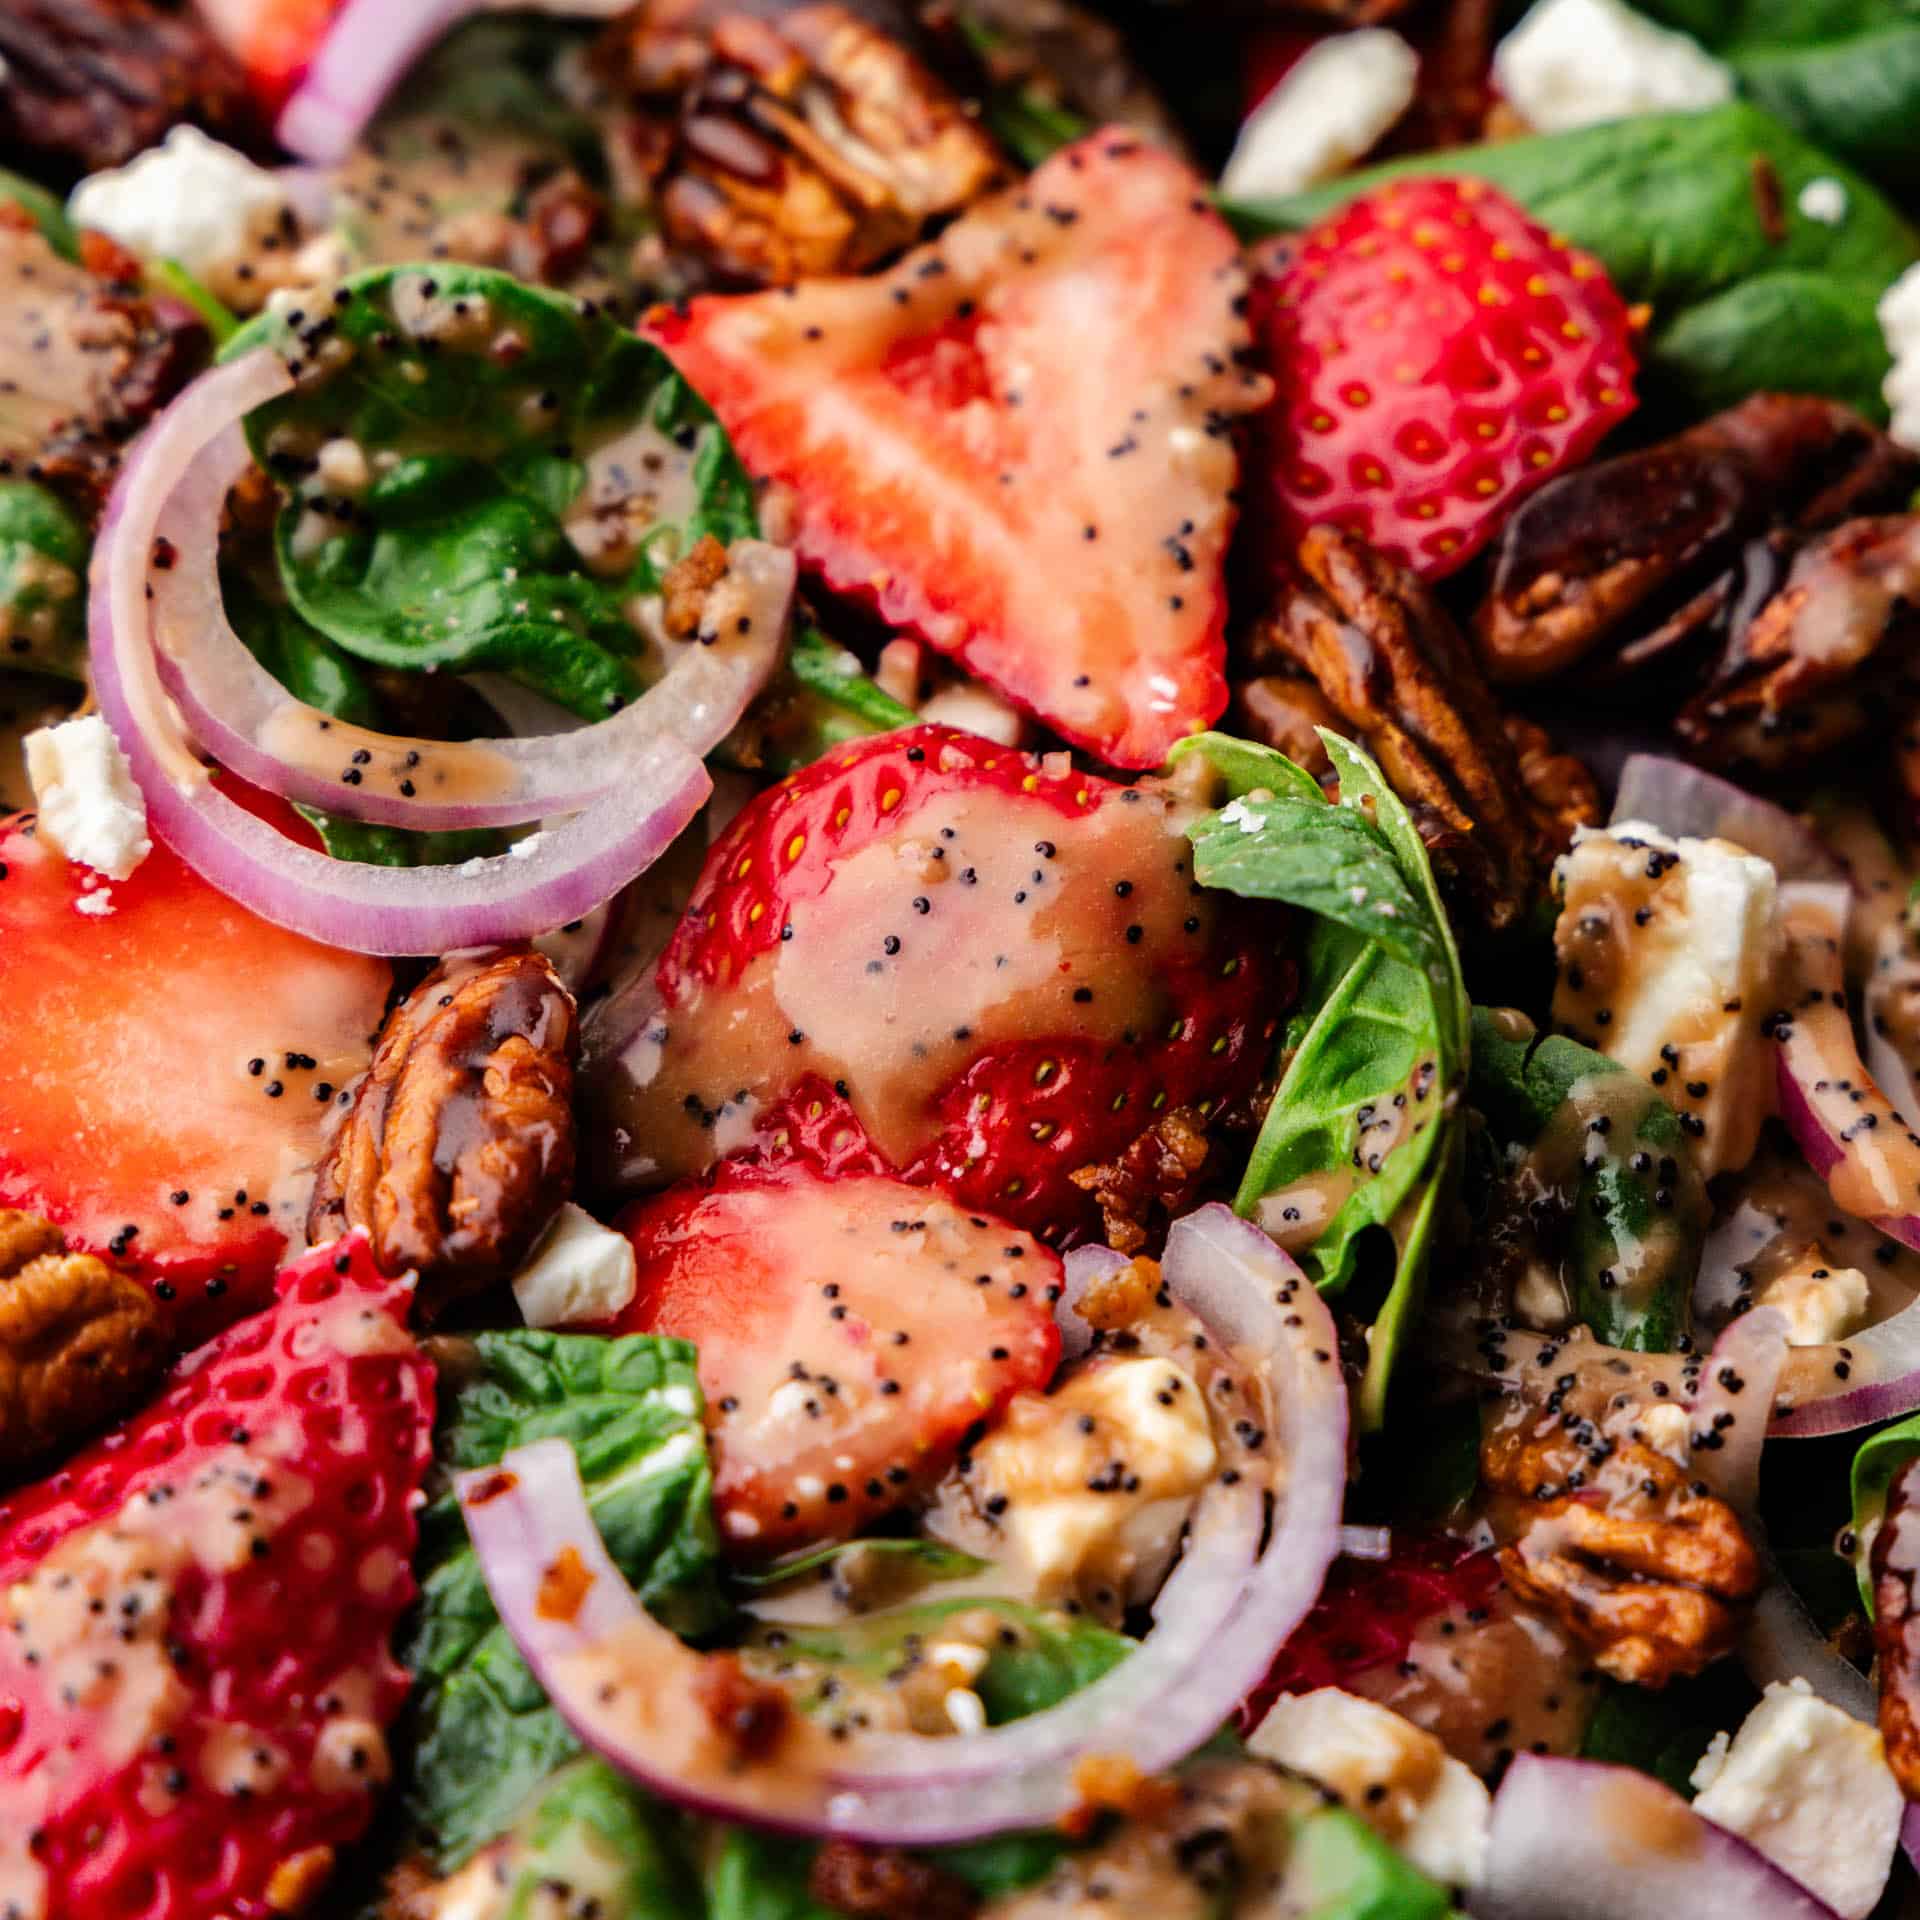 A close up view of strawberry spinach salad, show all of its yummy ingredients.